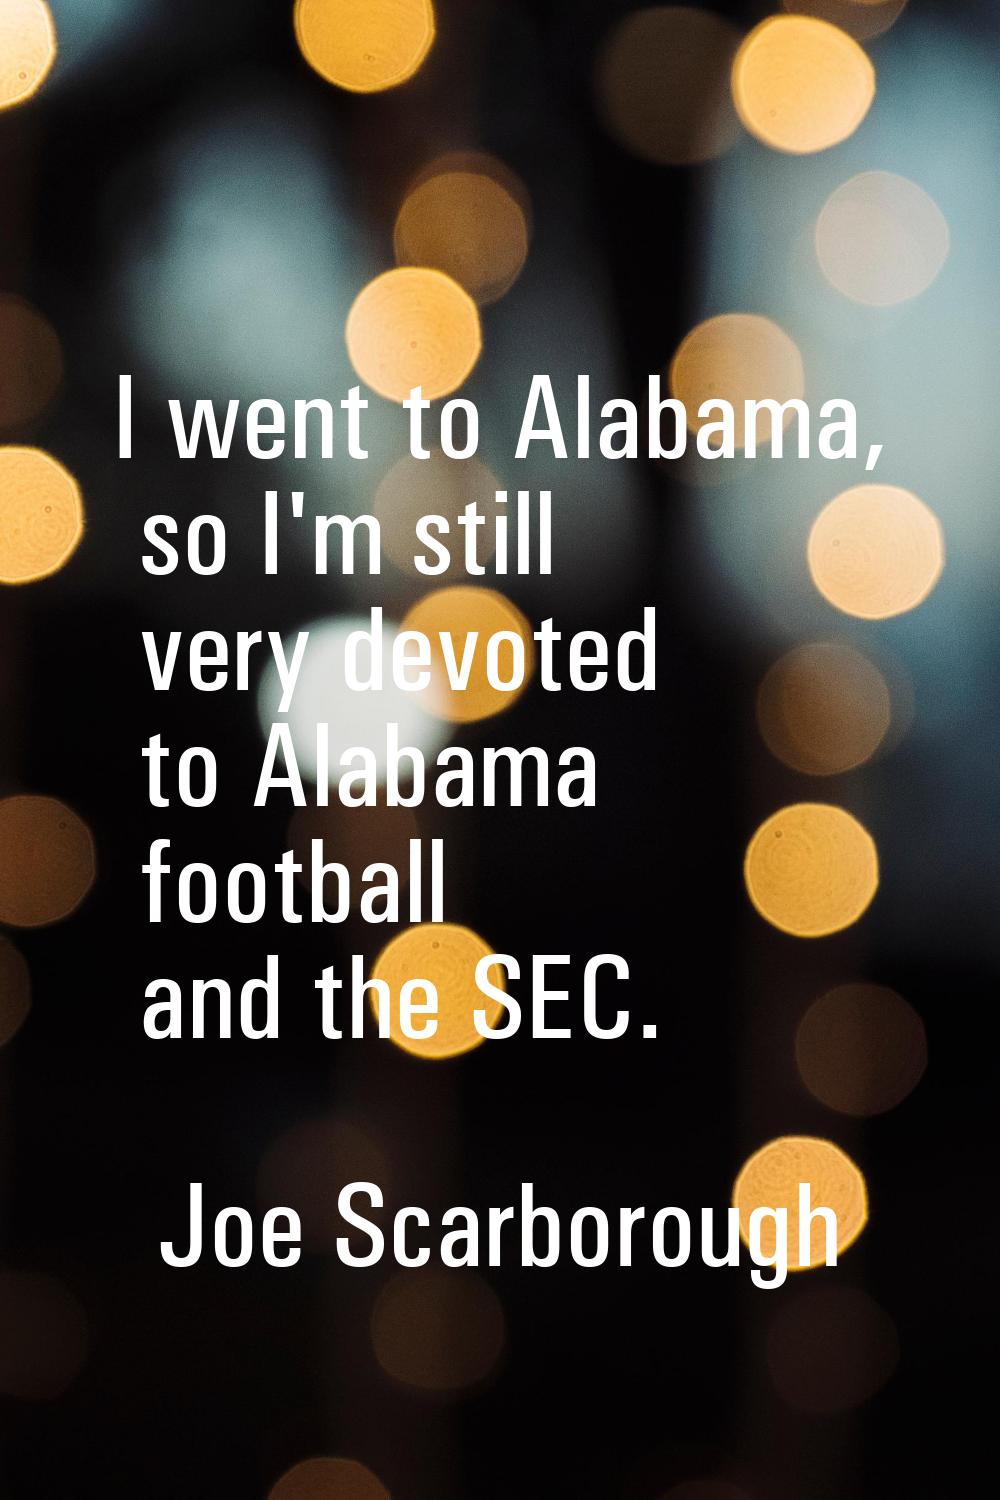 I went to Alabama, so I'm still very devoted to Alabama football and the SEC.